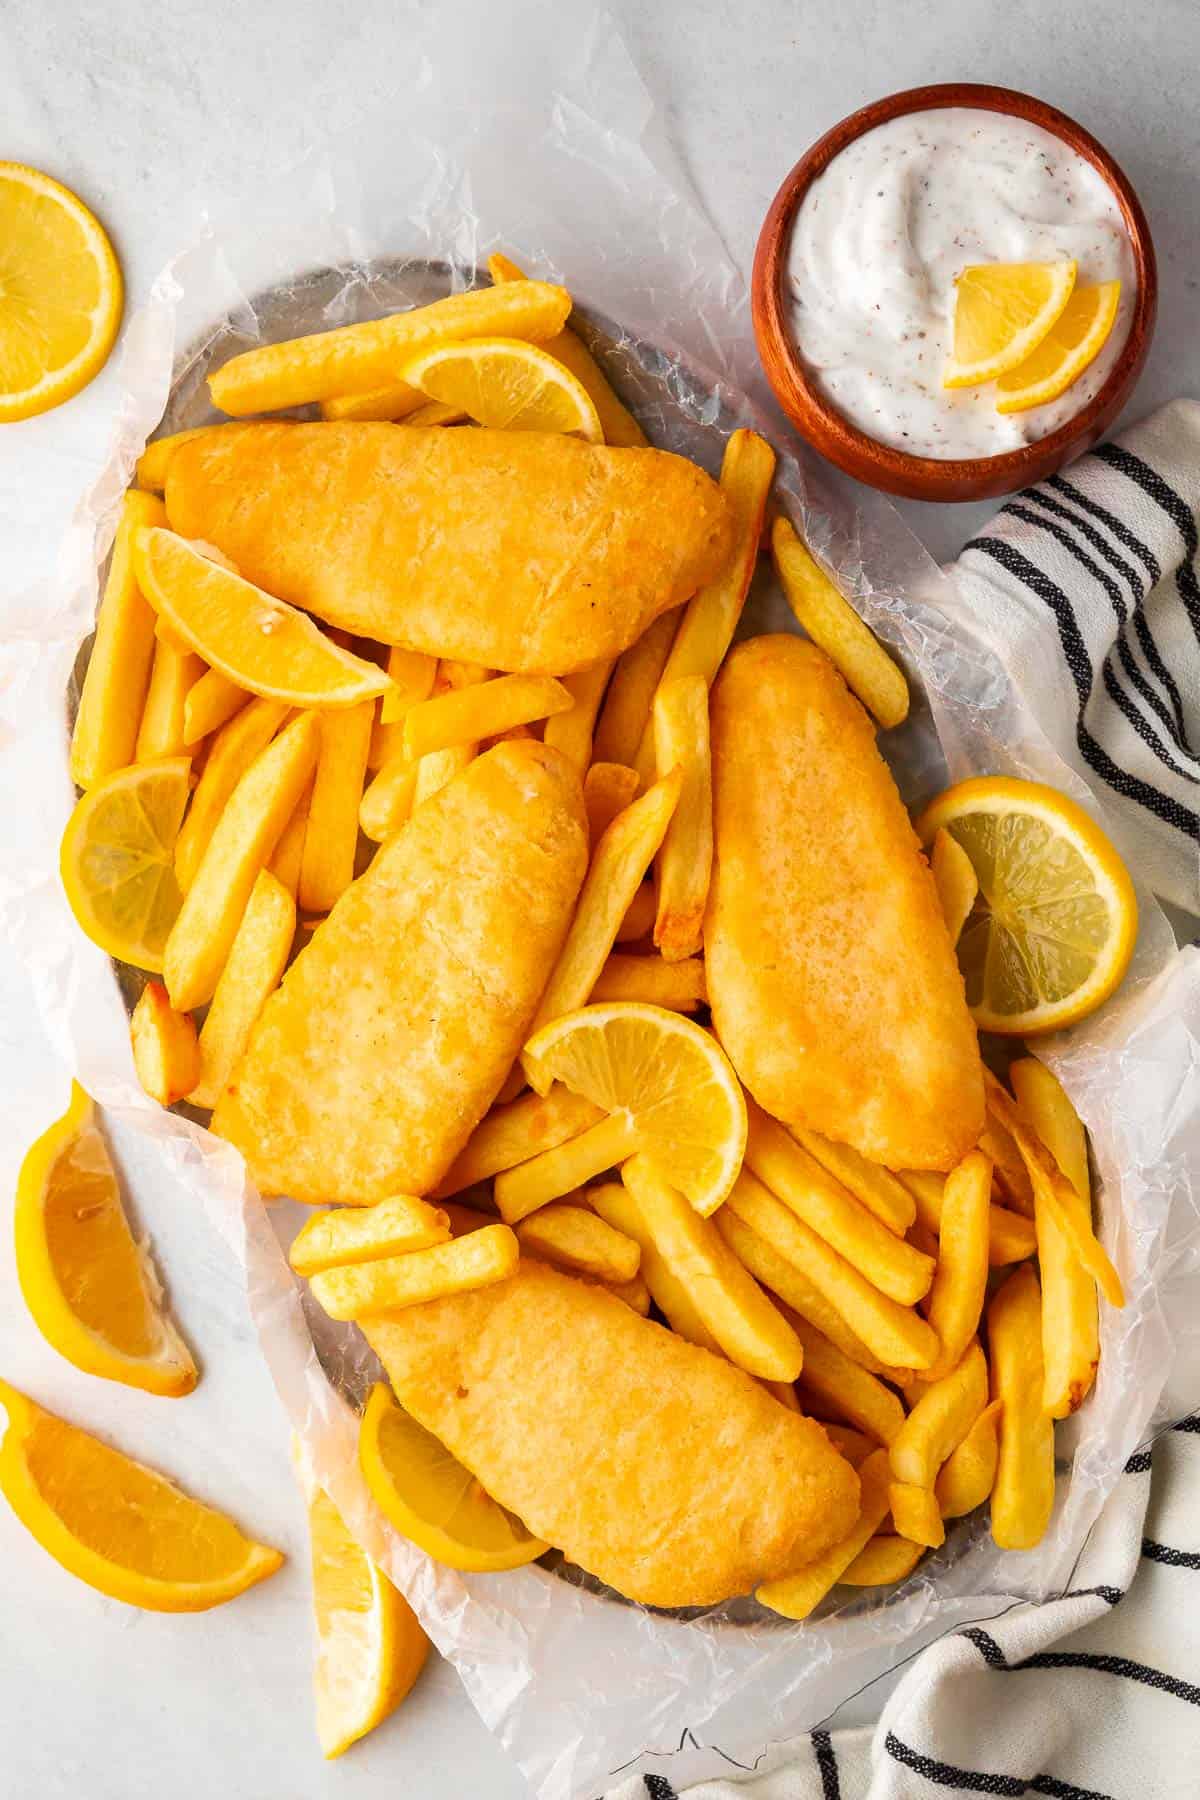 a serving platter full of fries, fish fillets and lemon slices and wedges. Tartar sauce and a decorative cloth to one side and more lemon wedges for decoration